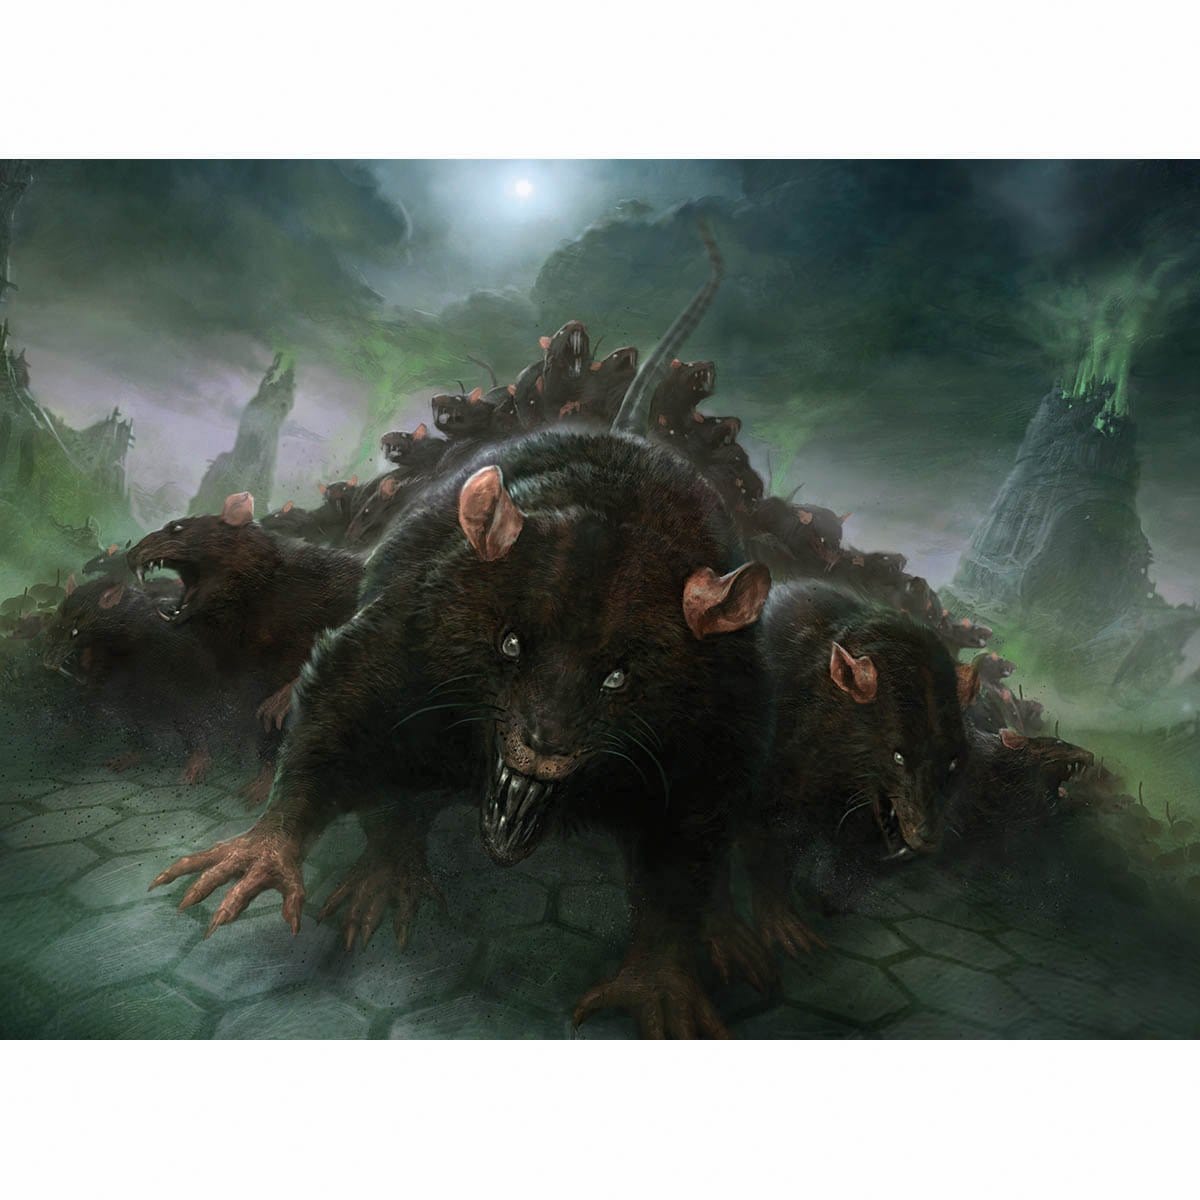 Relentless Rats Print - Print - Original Magic Art - Accessories for Magic the Gathering and other card games